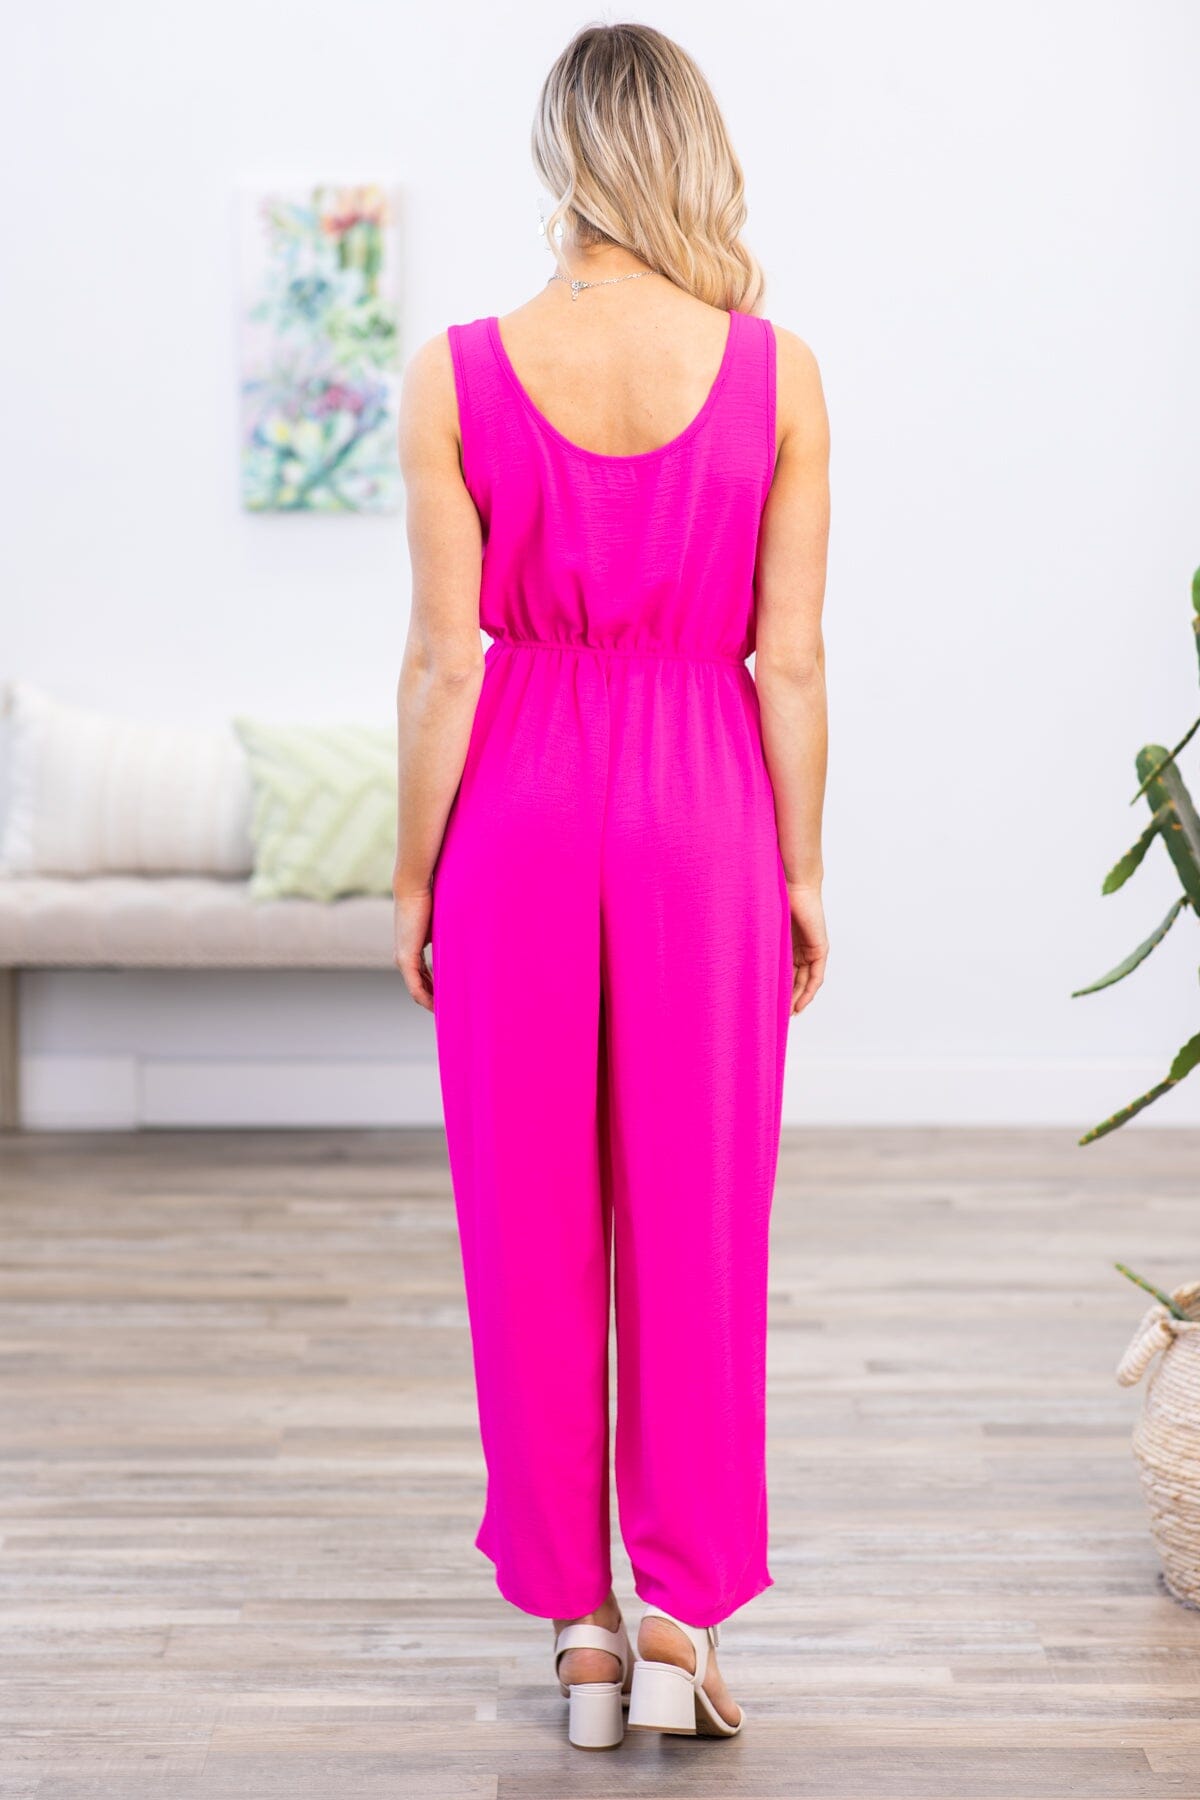 Hot Pink Sleeveless Jumpsuit With Pockets - Filly Flair